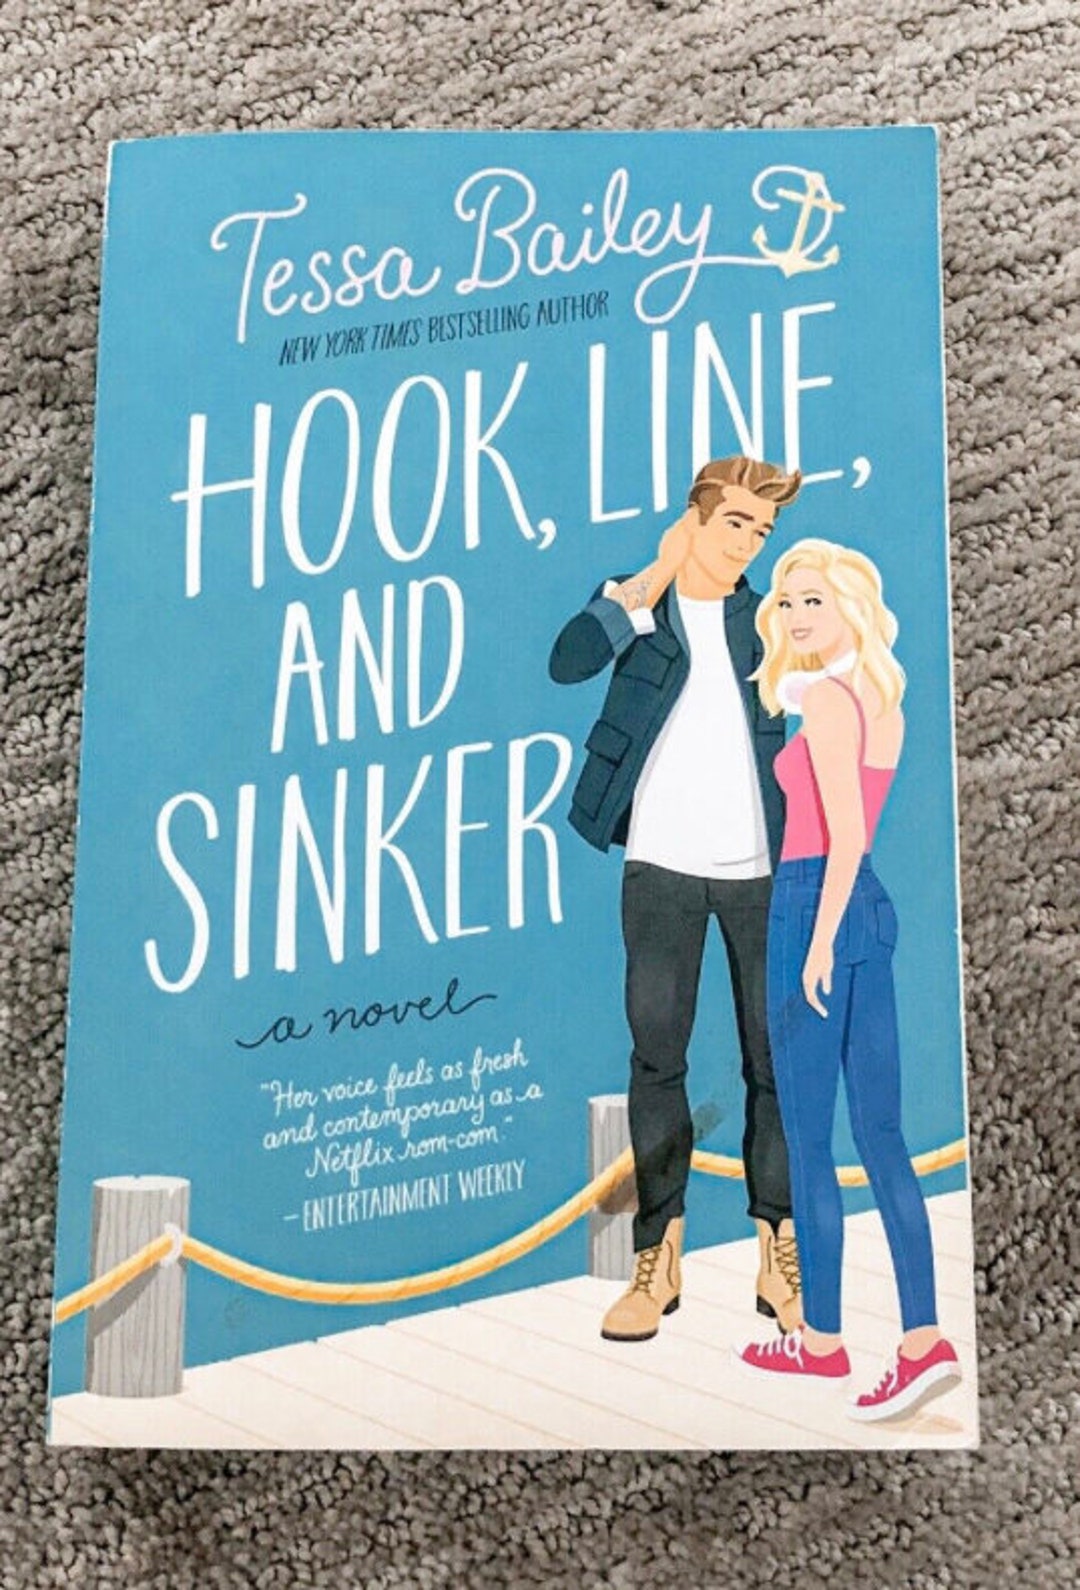 Hook Line and Sinker by Tessa Bailey - Etsy